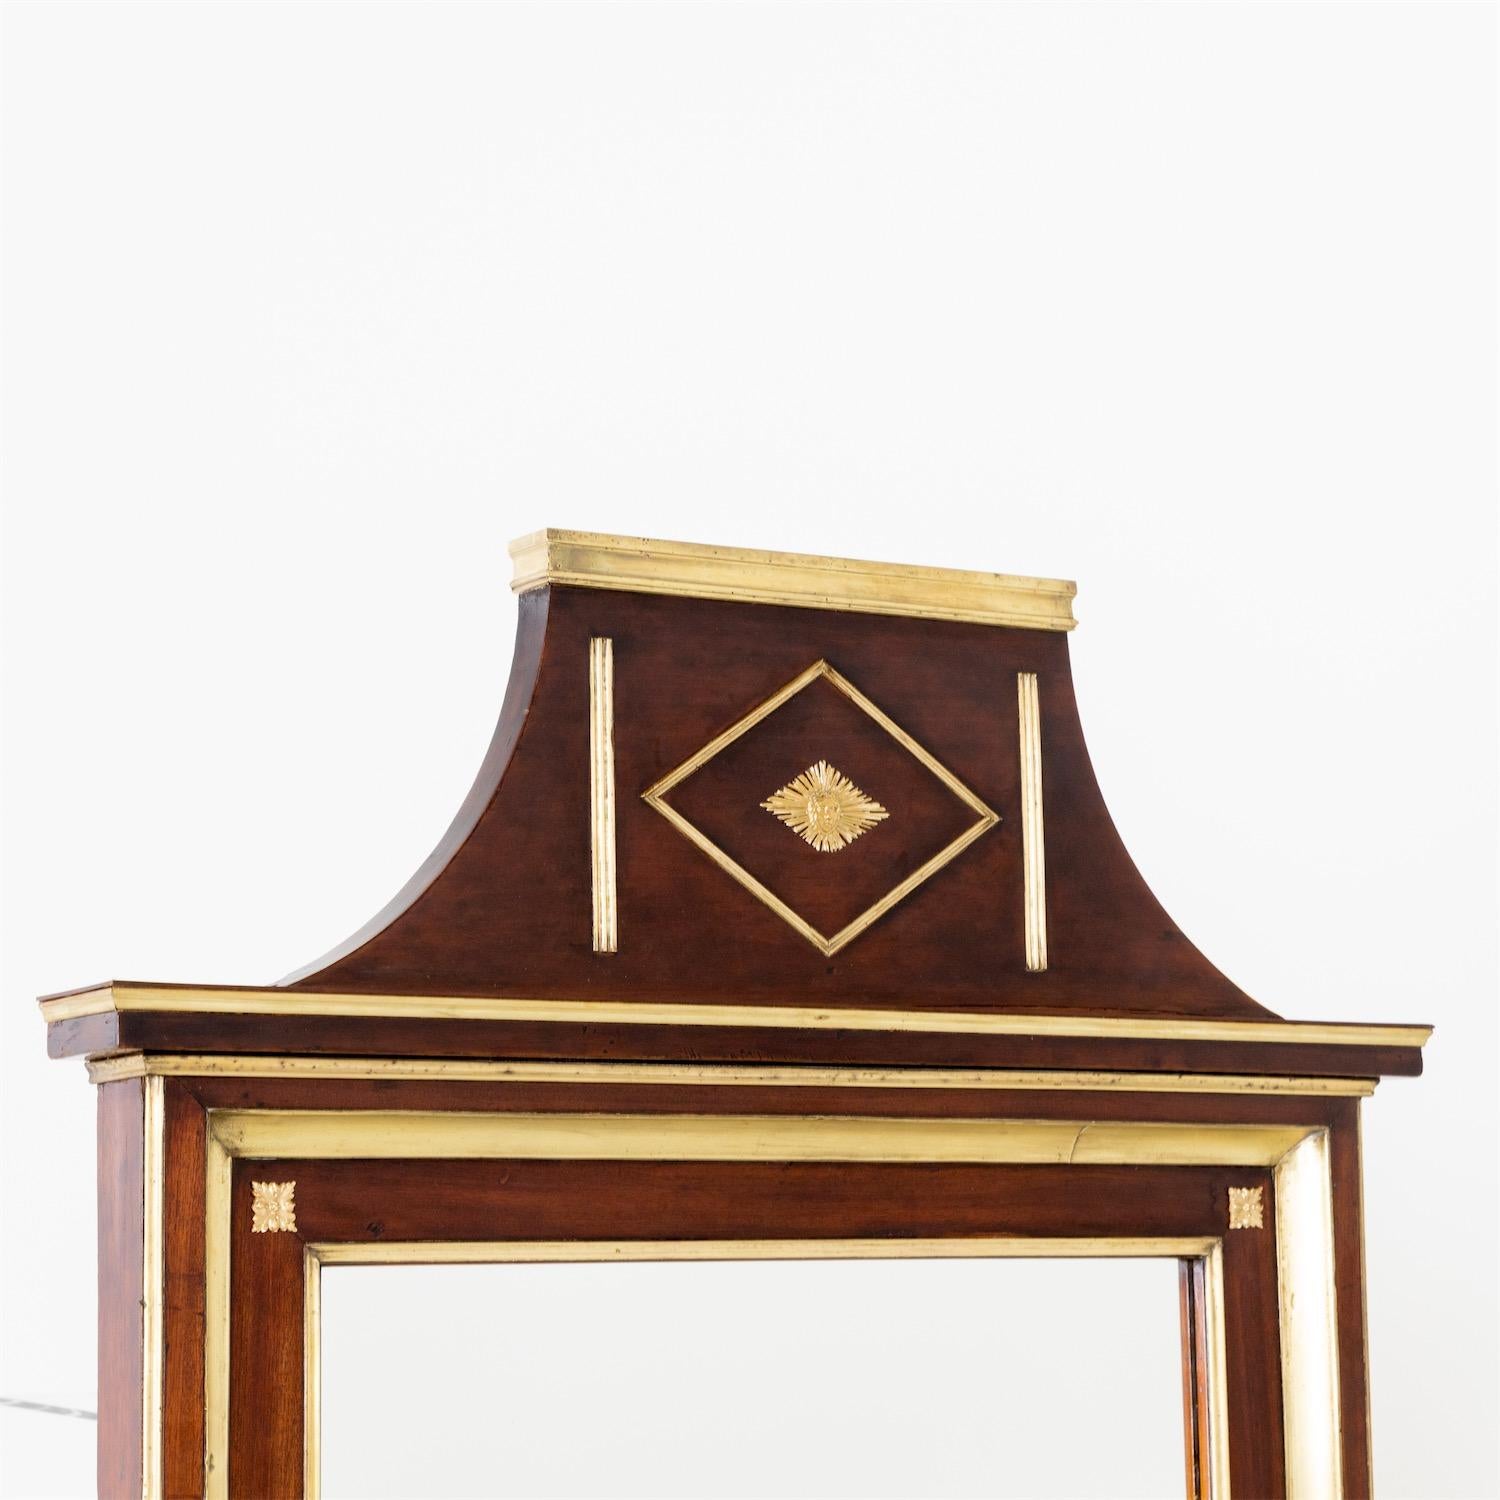 Russian pillar mirror in mahogany with brass molding and pedimented top.